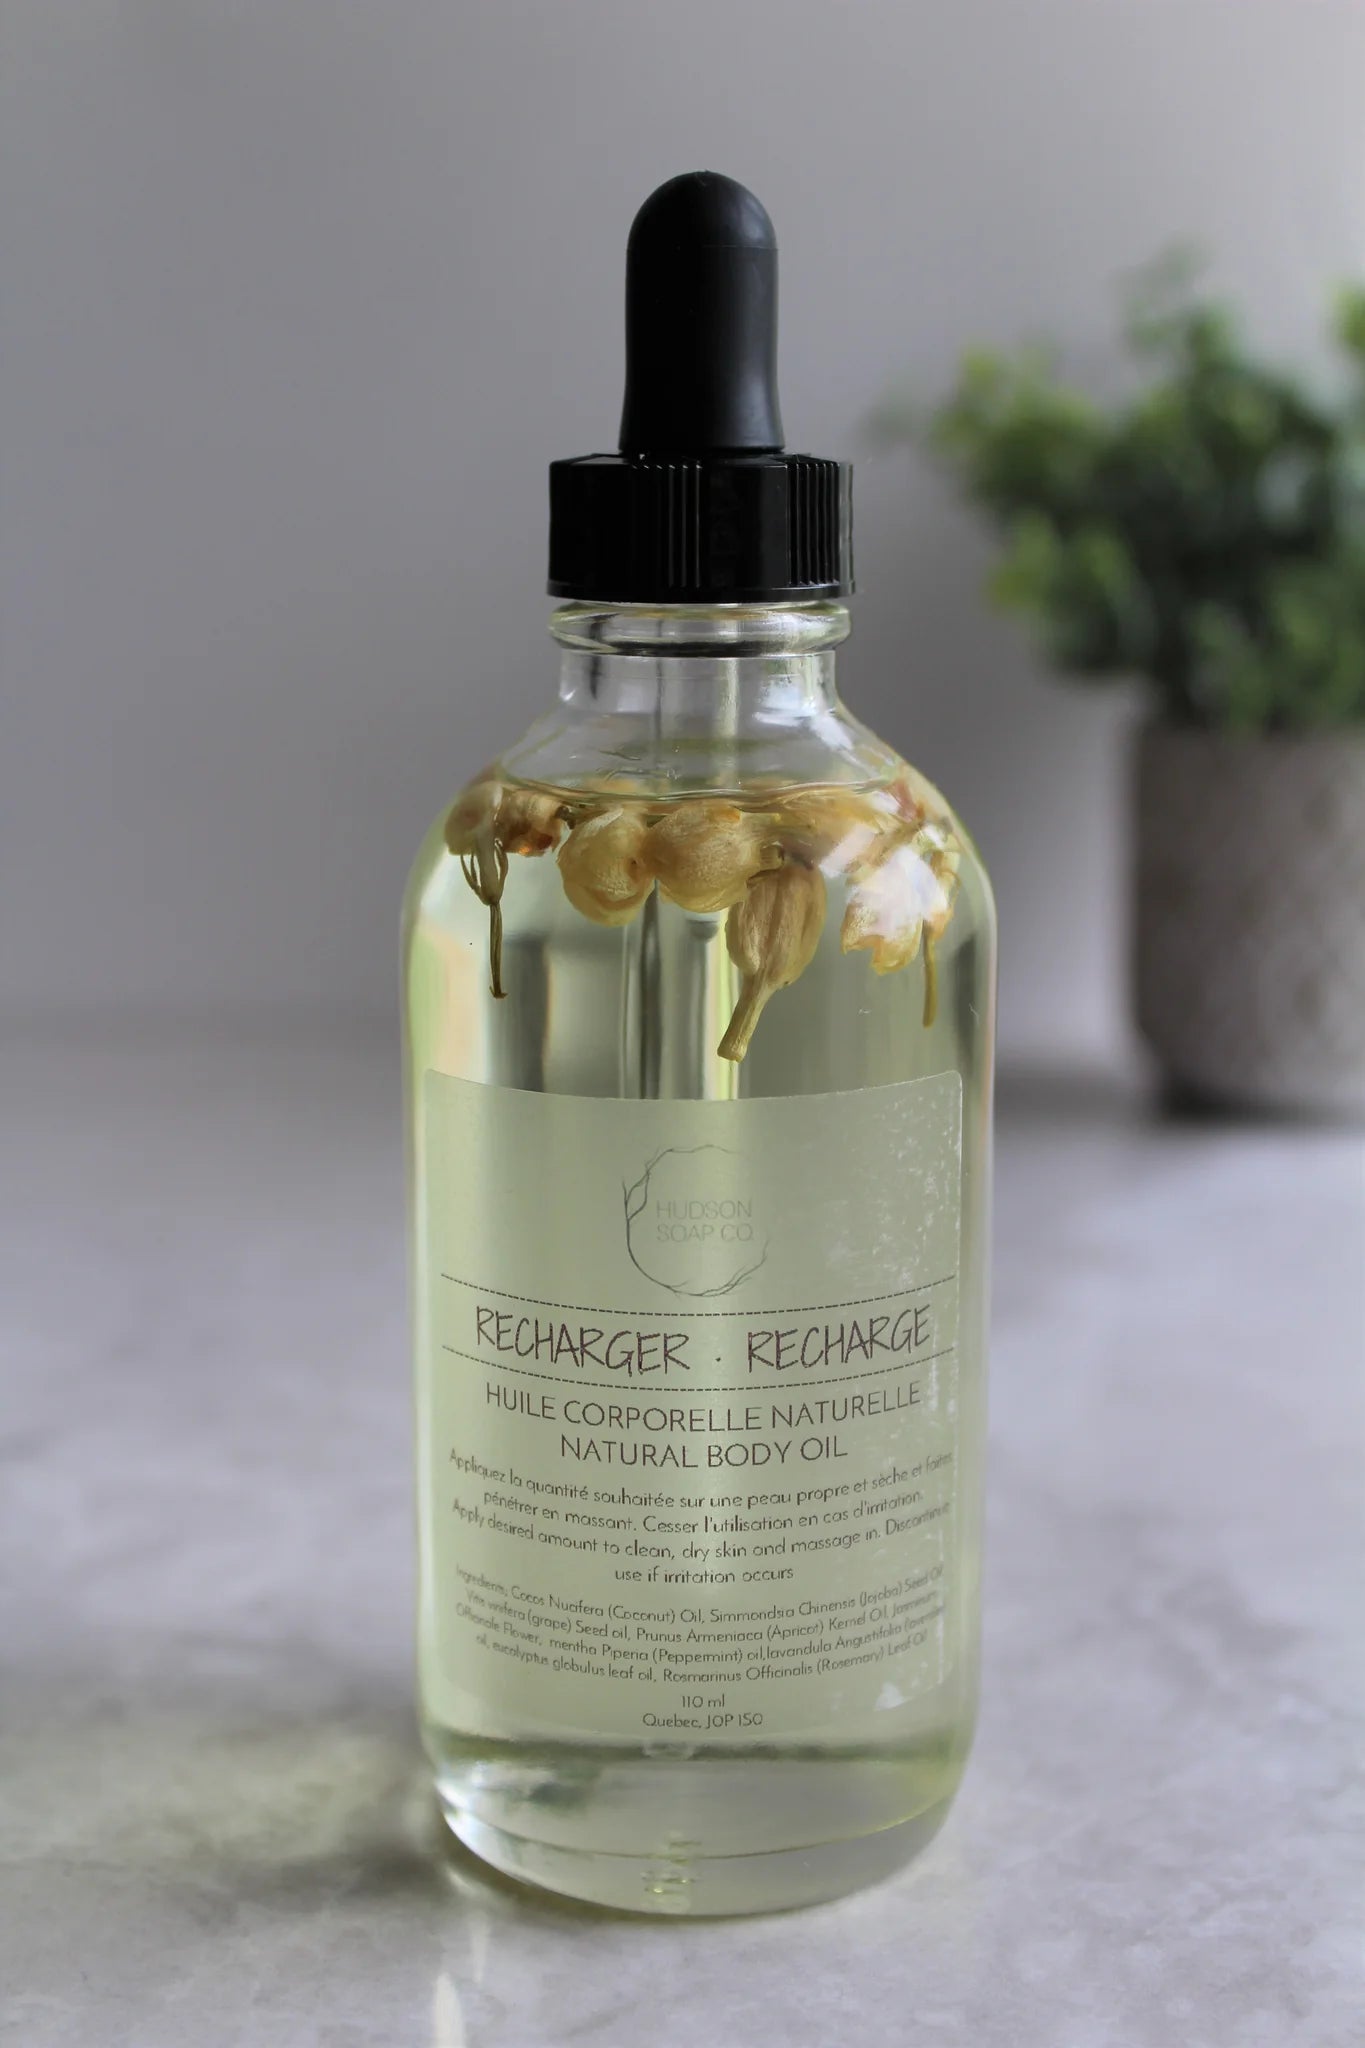 Bottle of Clear natural body oil with flower buds suspended in oil "Recharge"  with a plant off focus in background